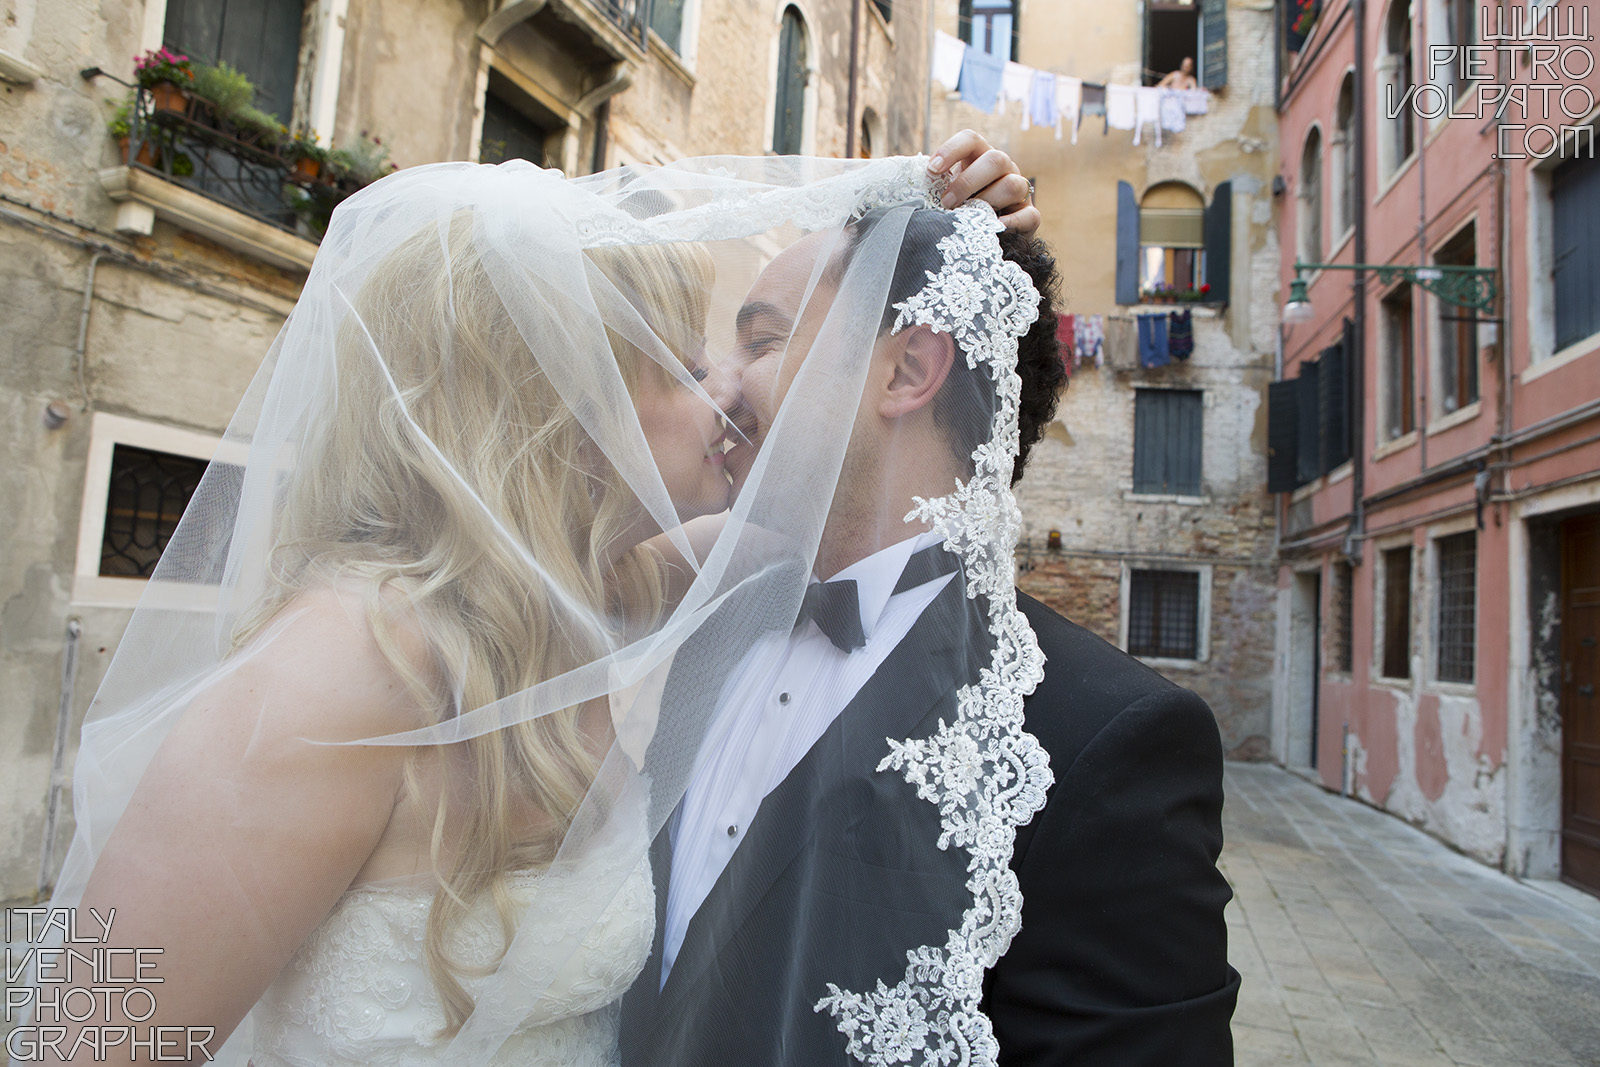 Hire a photographer in Venice Italy for honeymoon photo shoot during a walking tour and gondola ride ~ Romantic and fun photo walk in Venice